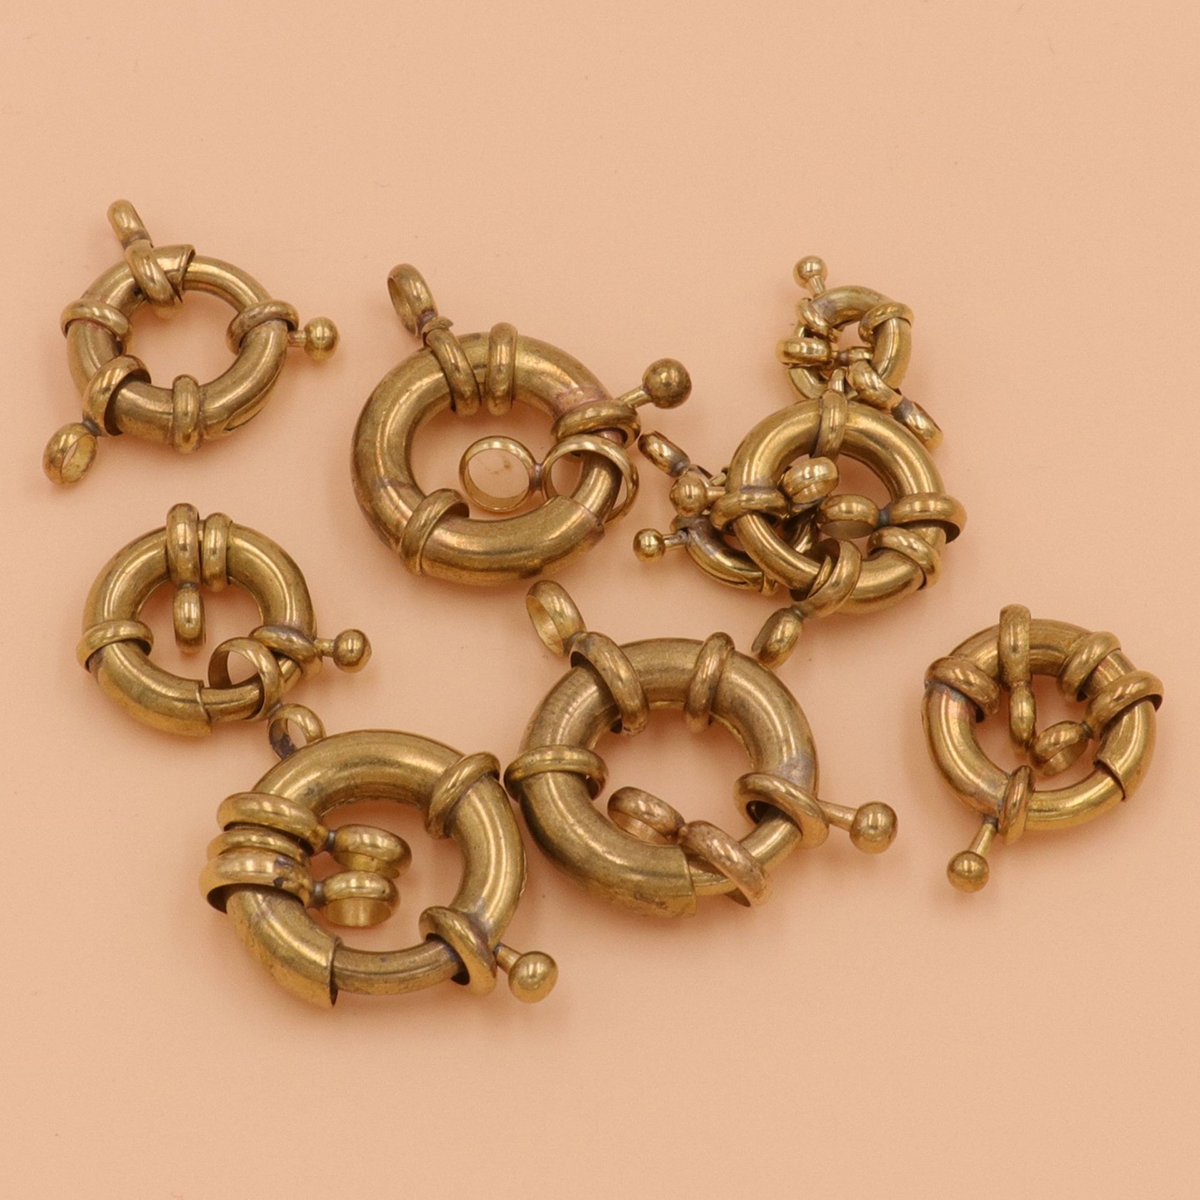 2pcs Brass Jewelry O-ring Snap Hook with Double "8" Ring Bracelet Necklace Connector Jewelry Hardware Accessories